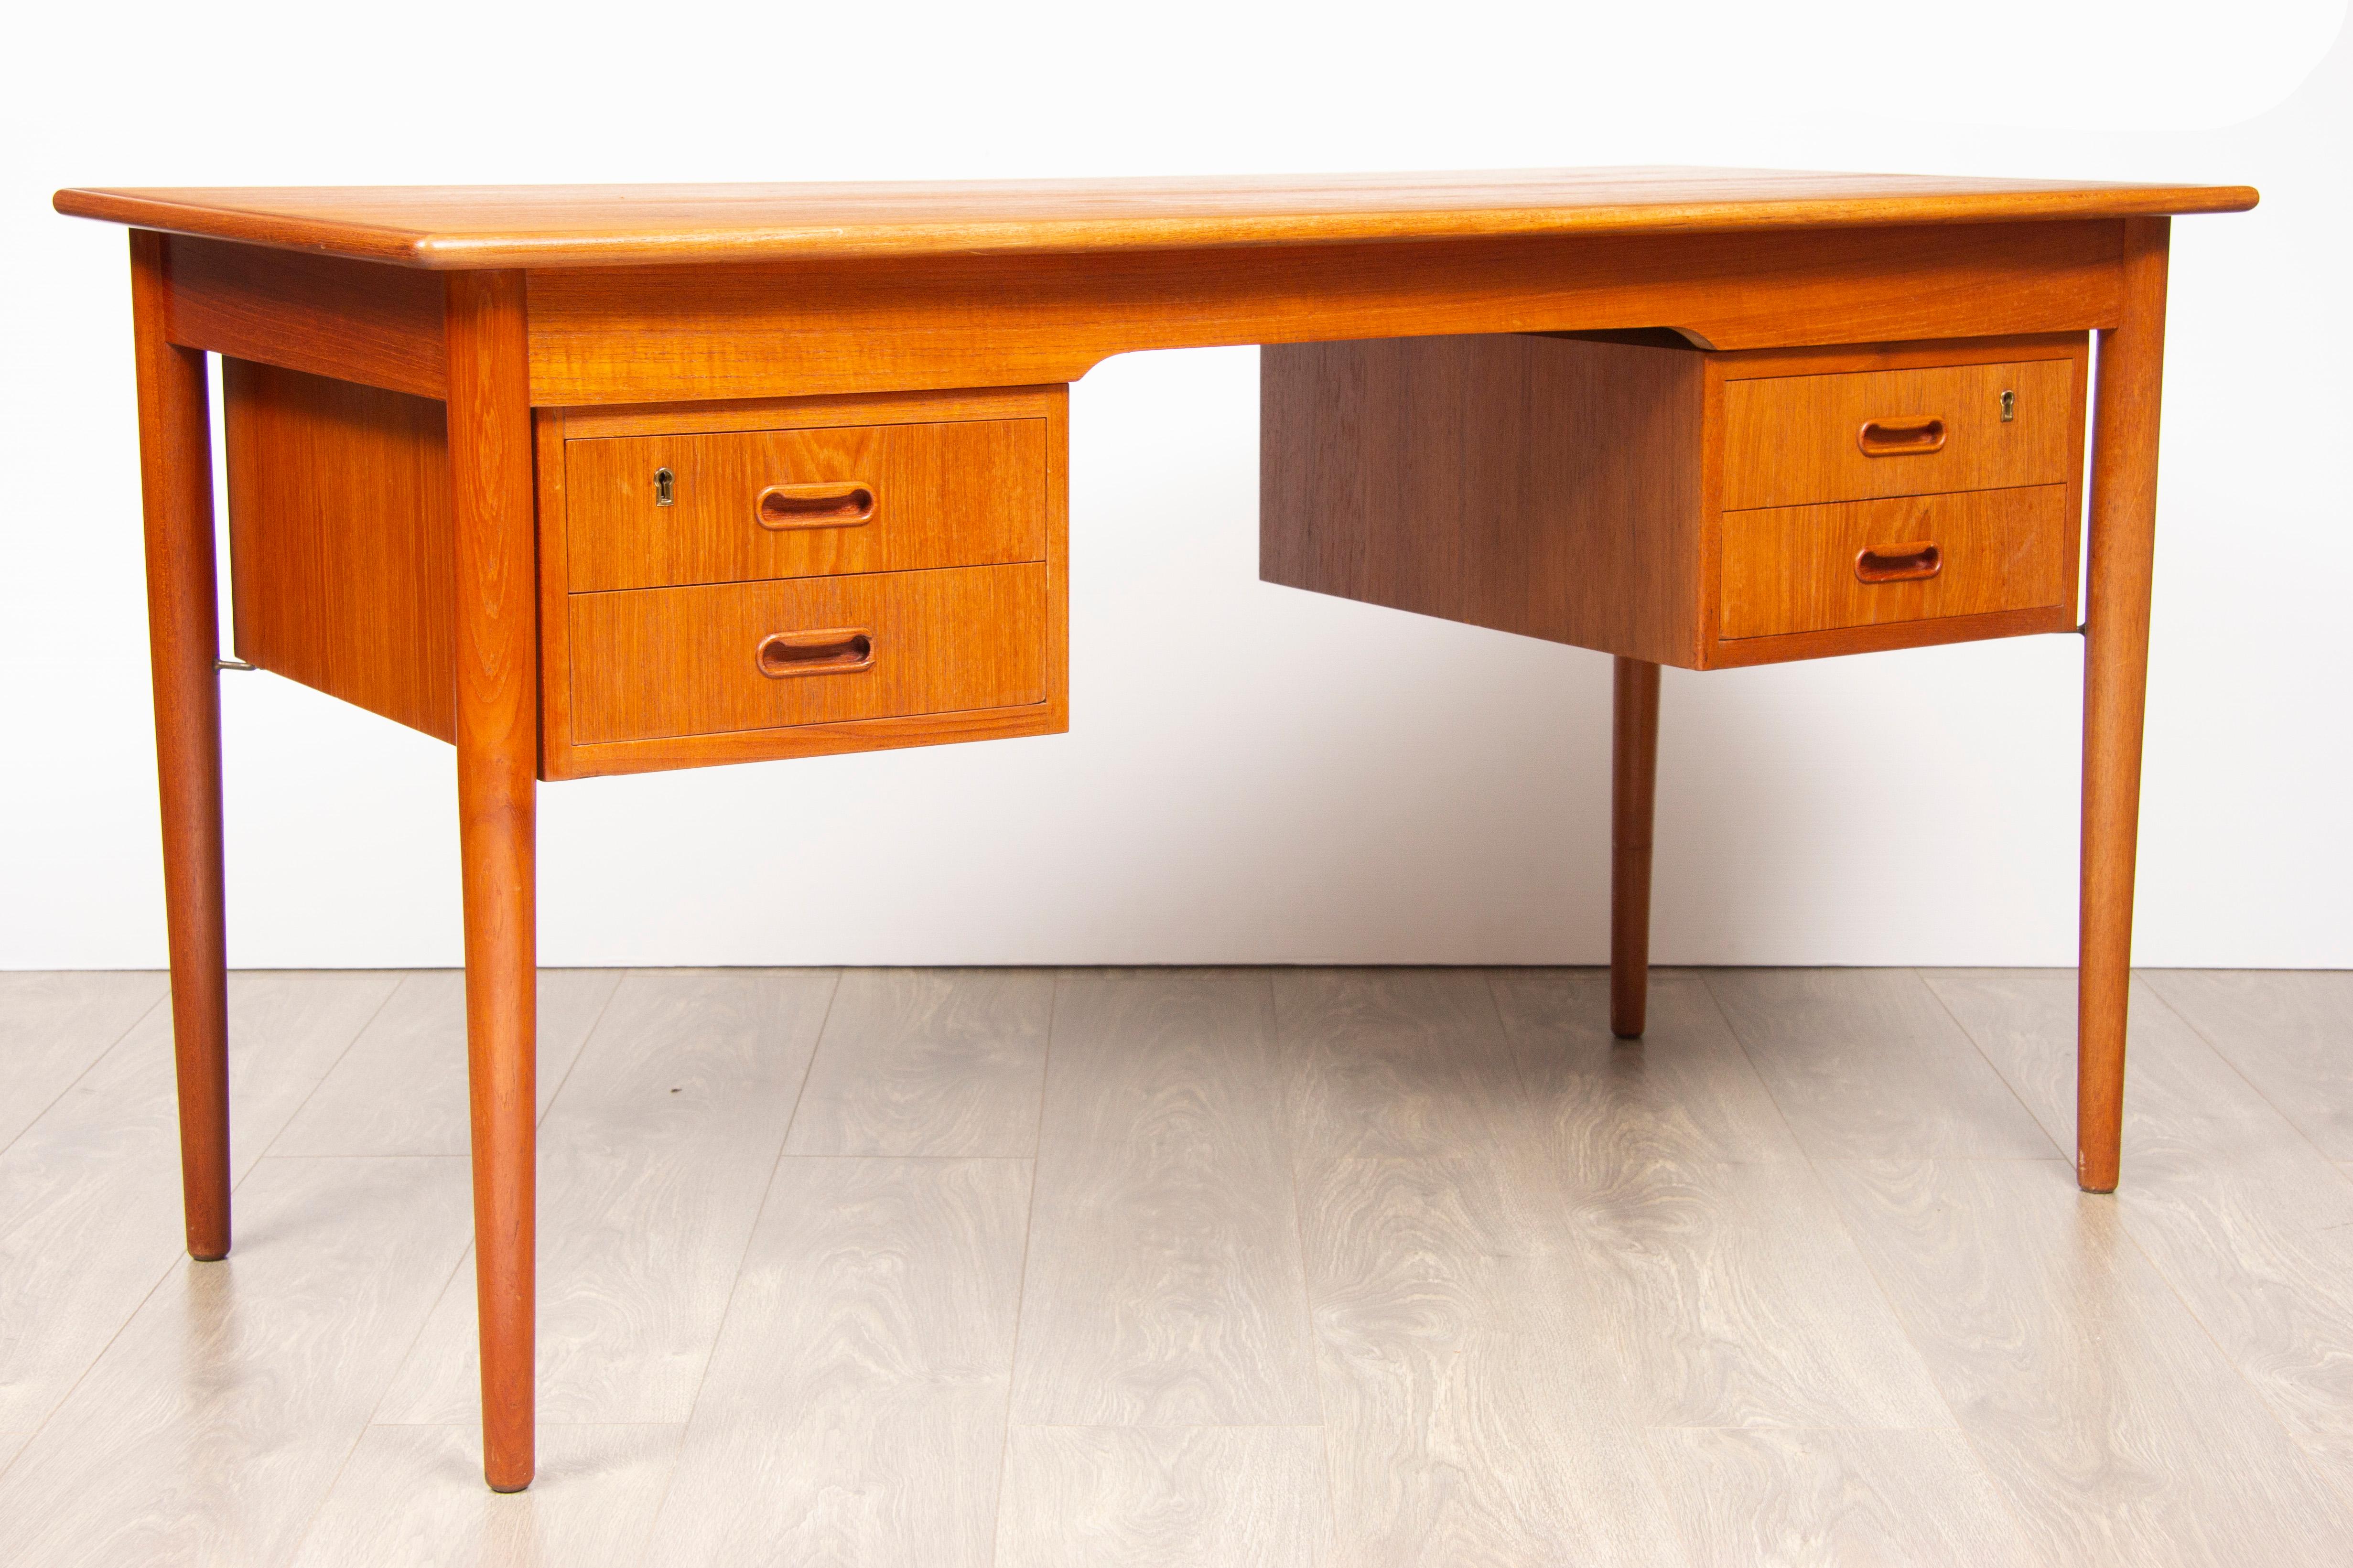 1960s Danish teak desk with four feature drawers suspended beneath connected to the legs with a brass fixture holding them in place. Each drawer has a central recessed handle and brass key hole sadly the keys are missing. The desk has been